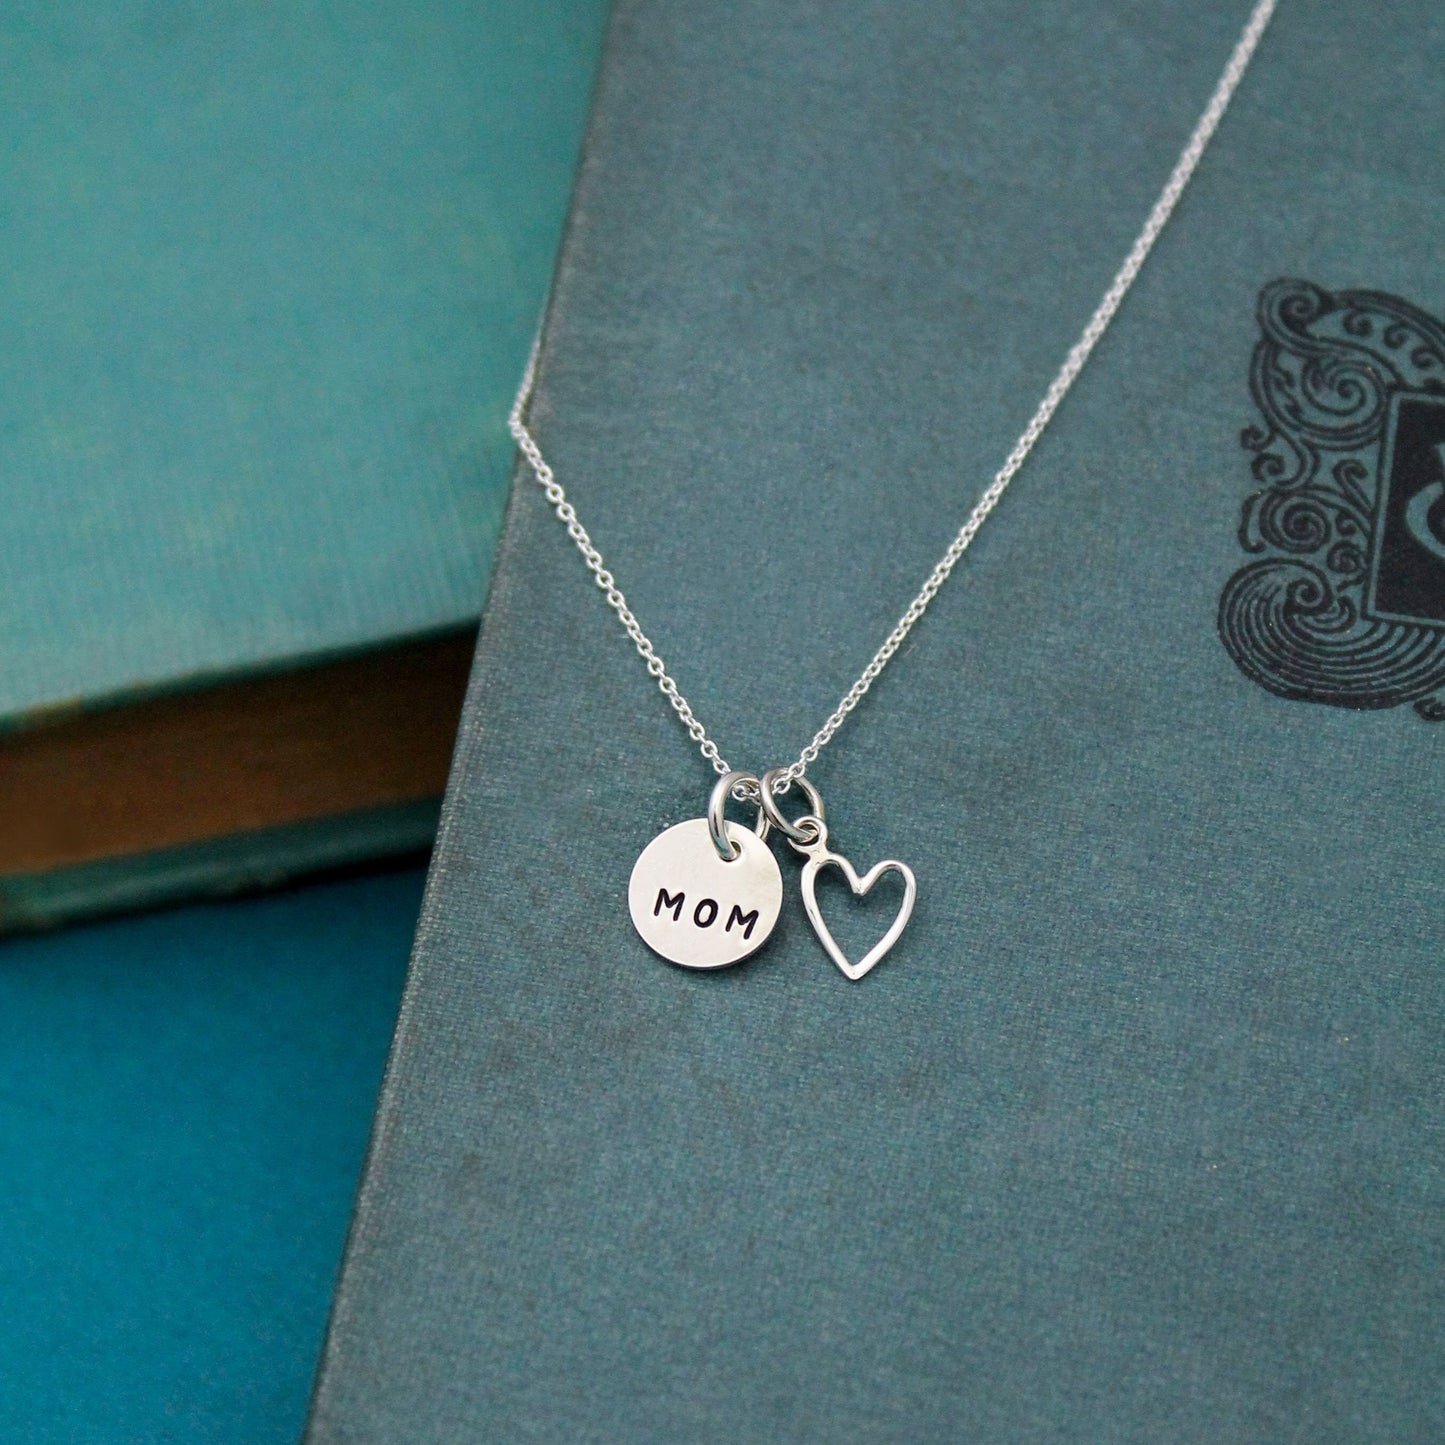 Dainty Mom Necklace Personalized in Sterling Silver, Hand Stamped Jewelry Gift, Mother Jewelry, Mother's Day Box Gift, Gifts for Mom